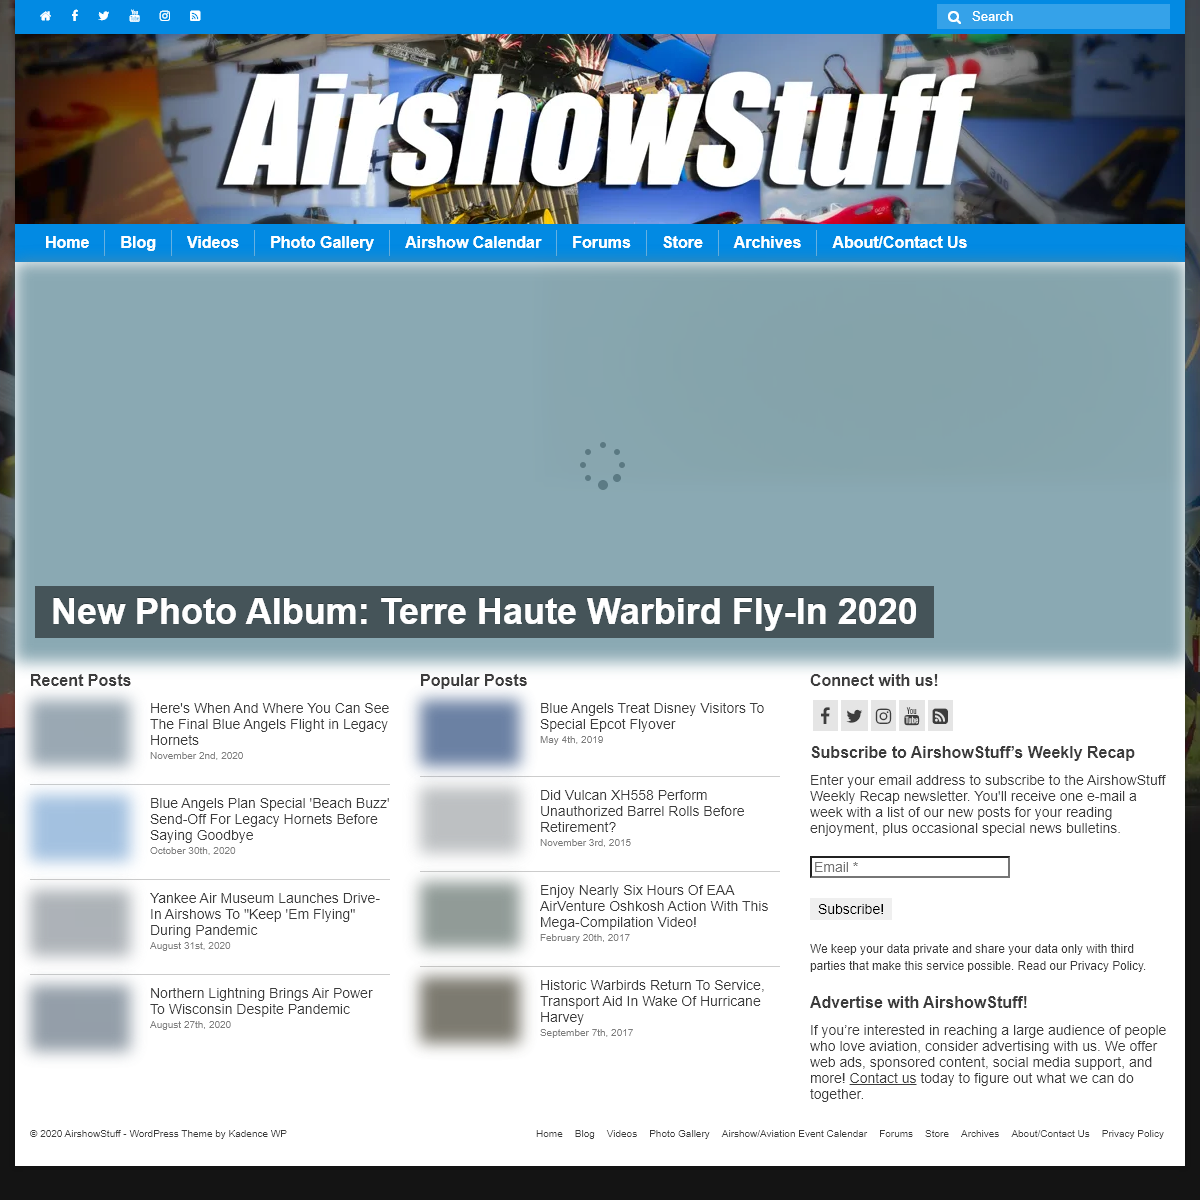 A complete backup of airshowstuff.com